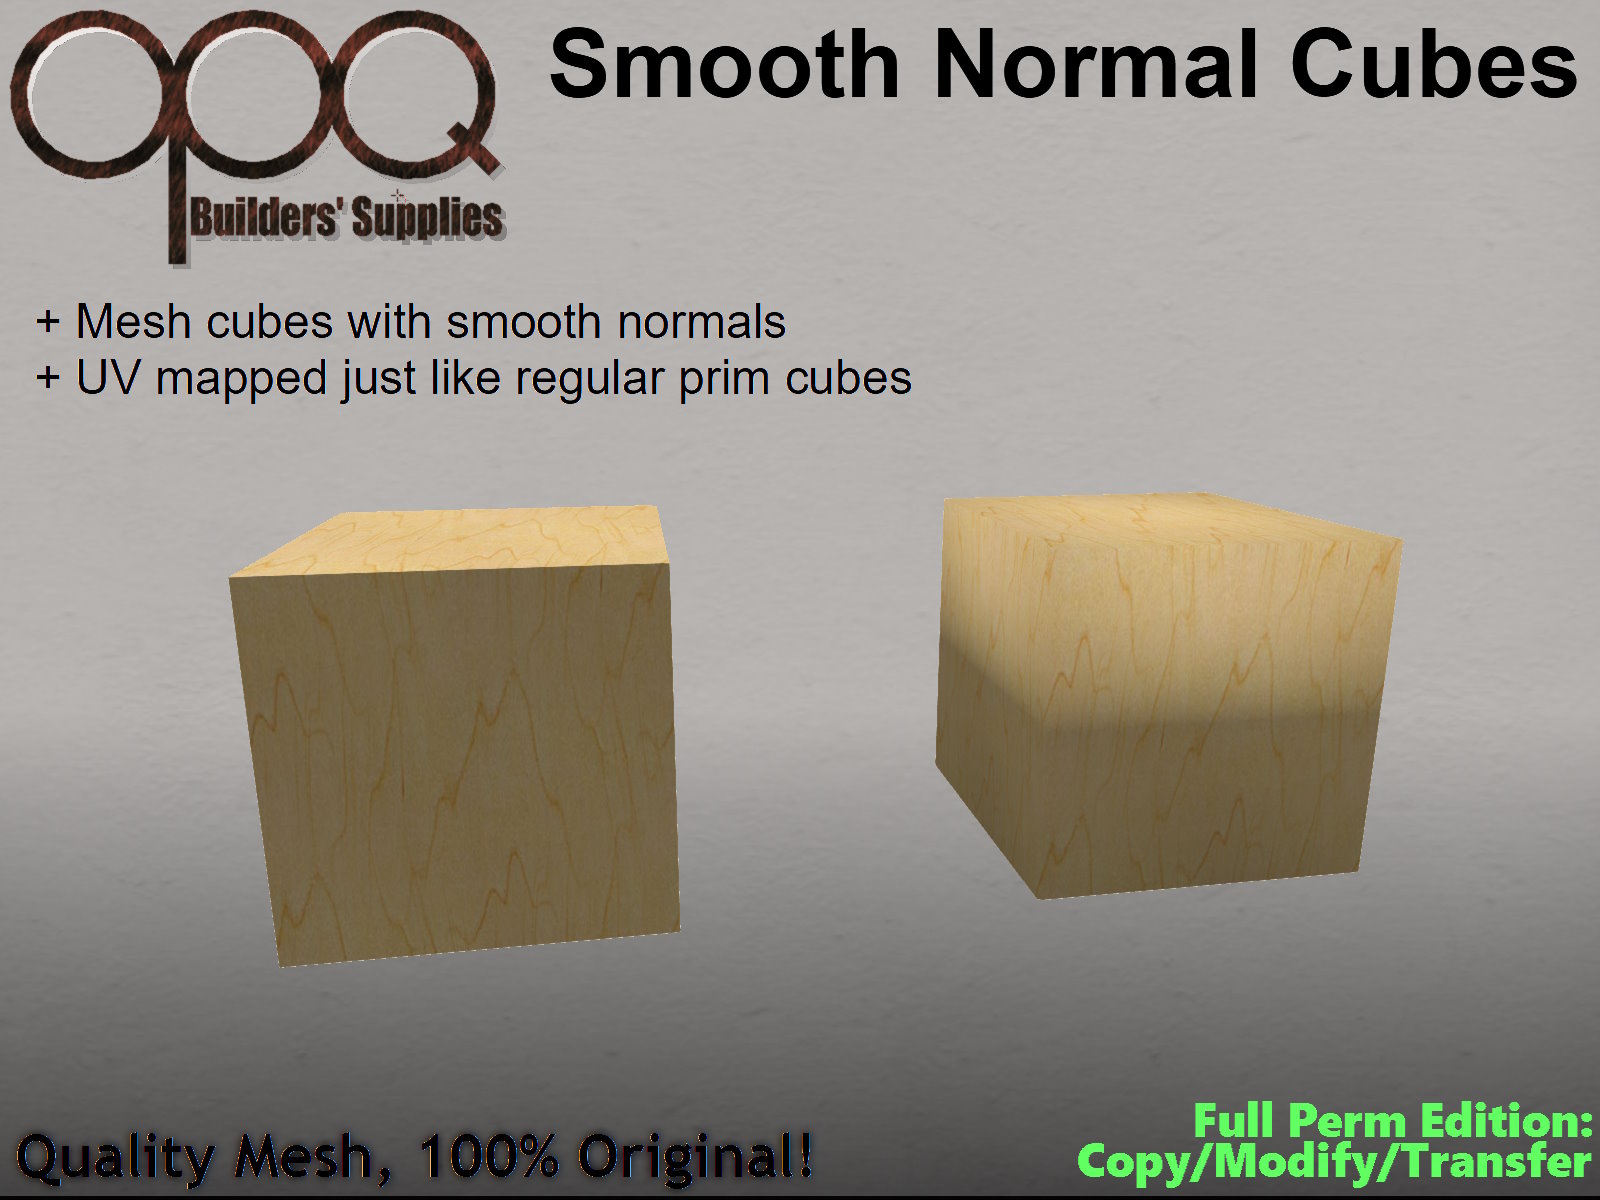 OPQ Smooth Normal Cubes Poster.jpg